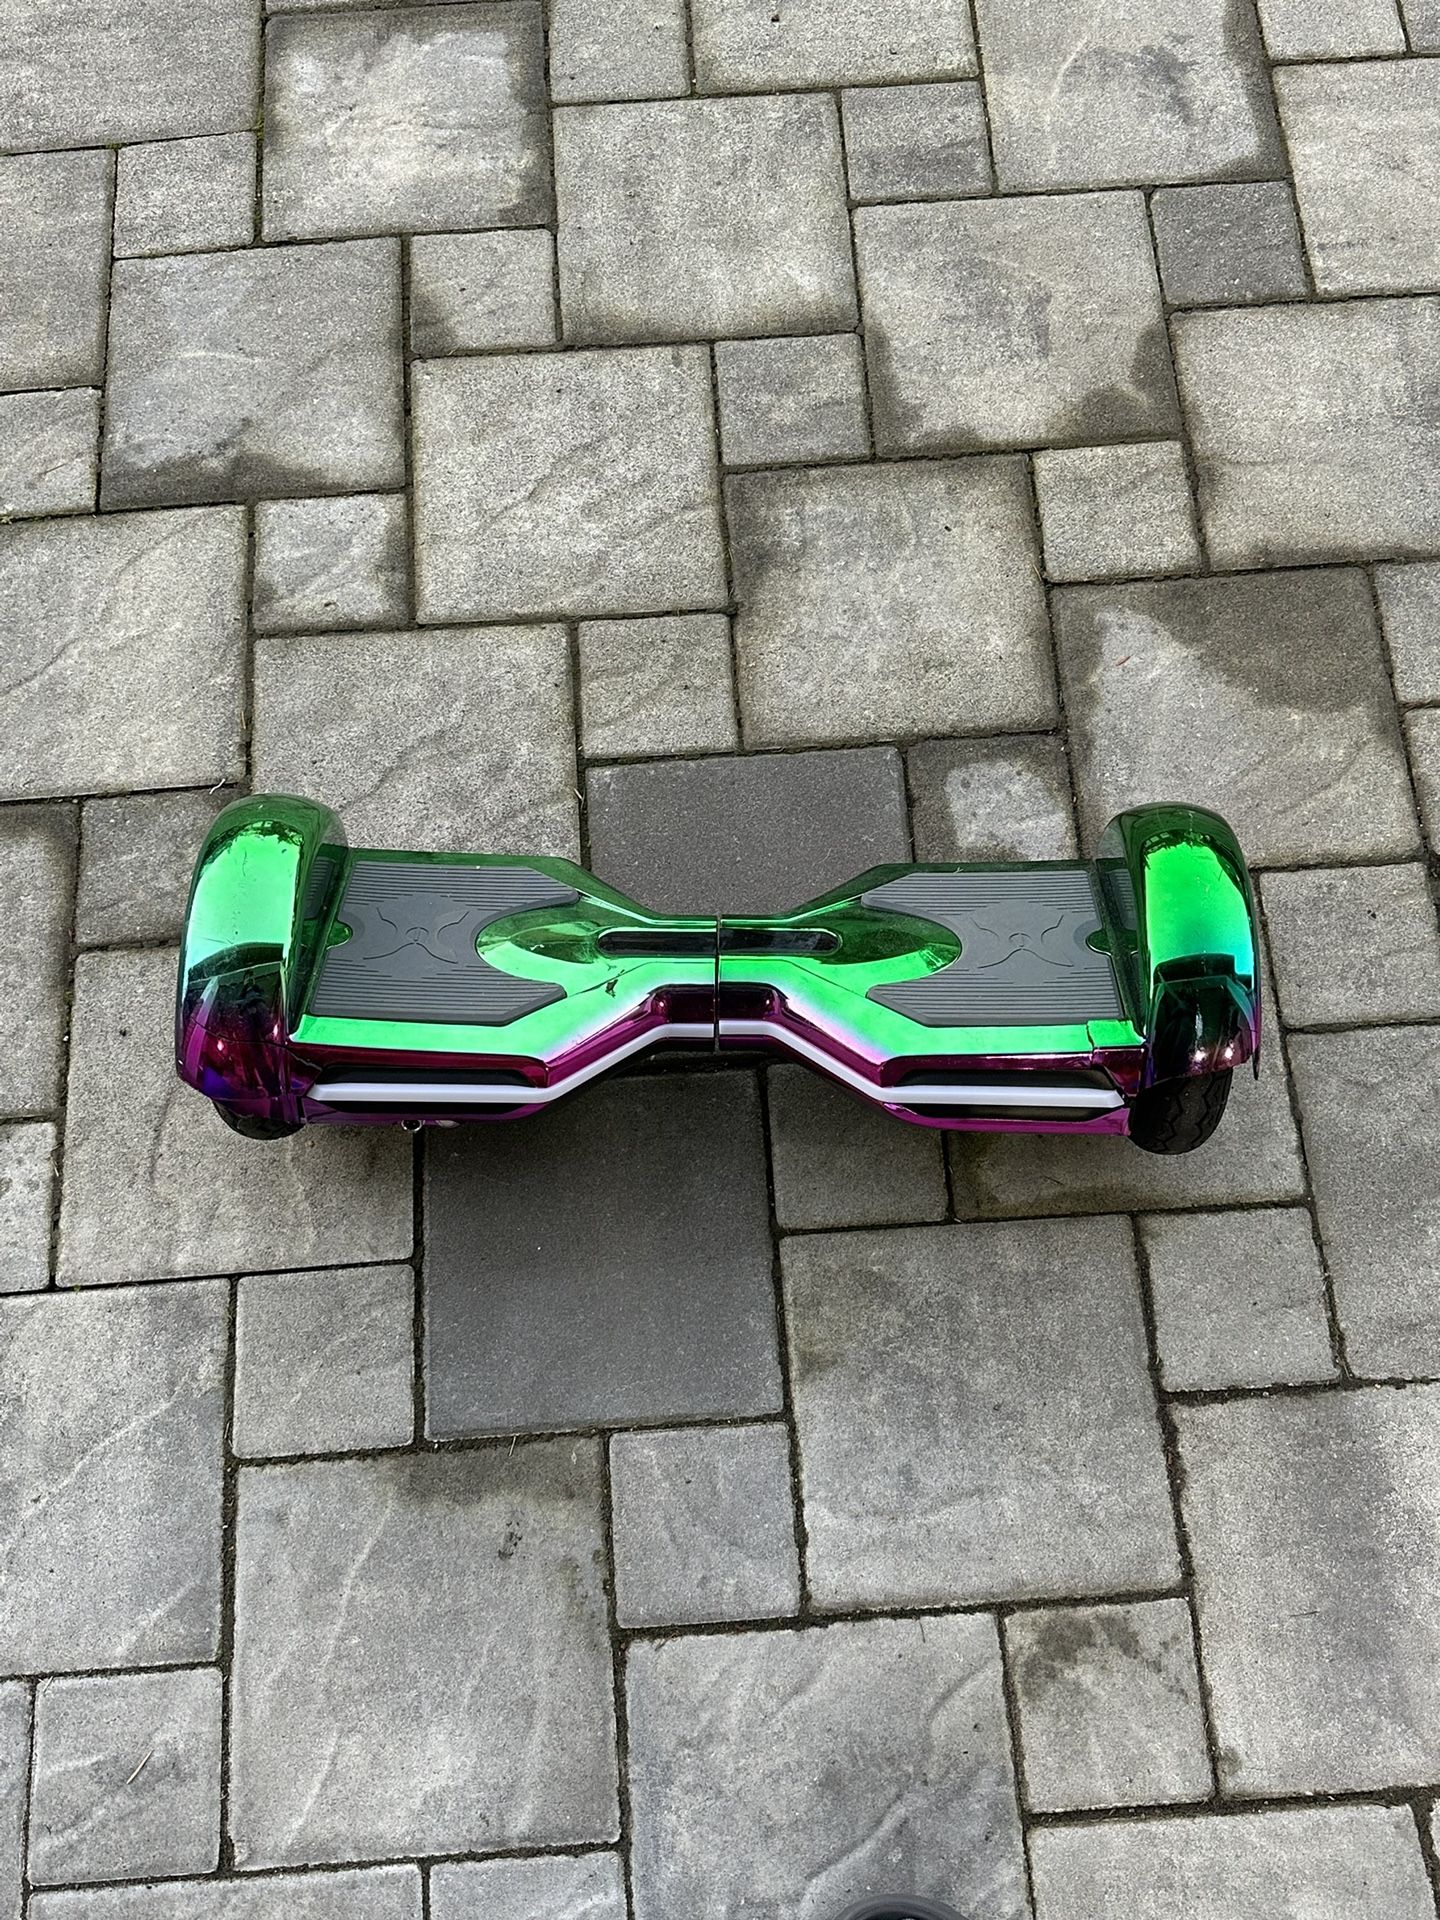 Full Operational Colorful Hoverboard